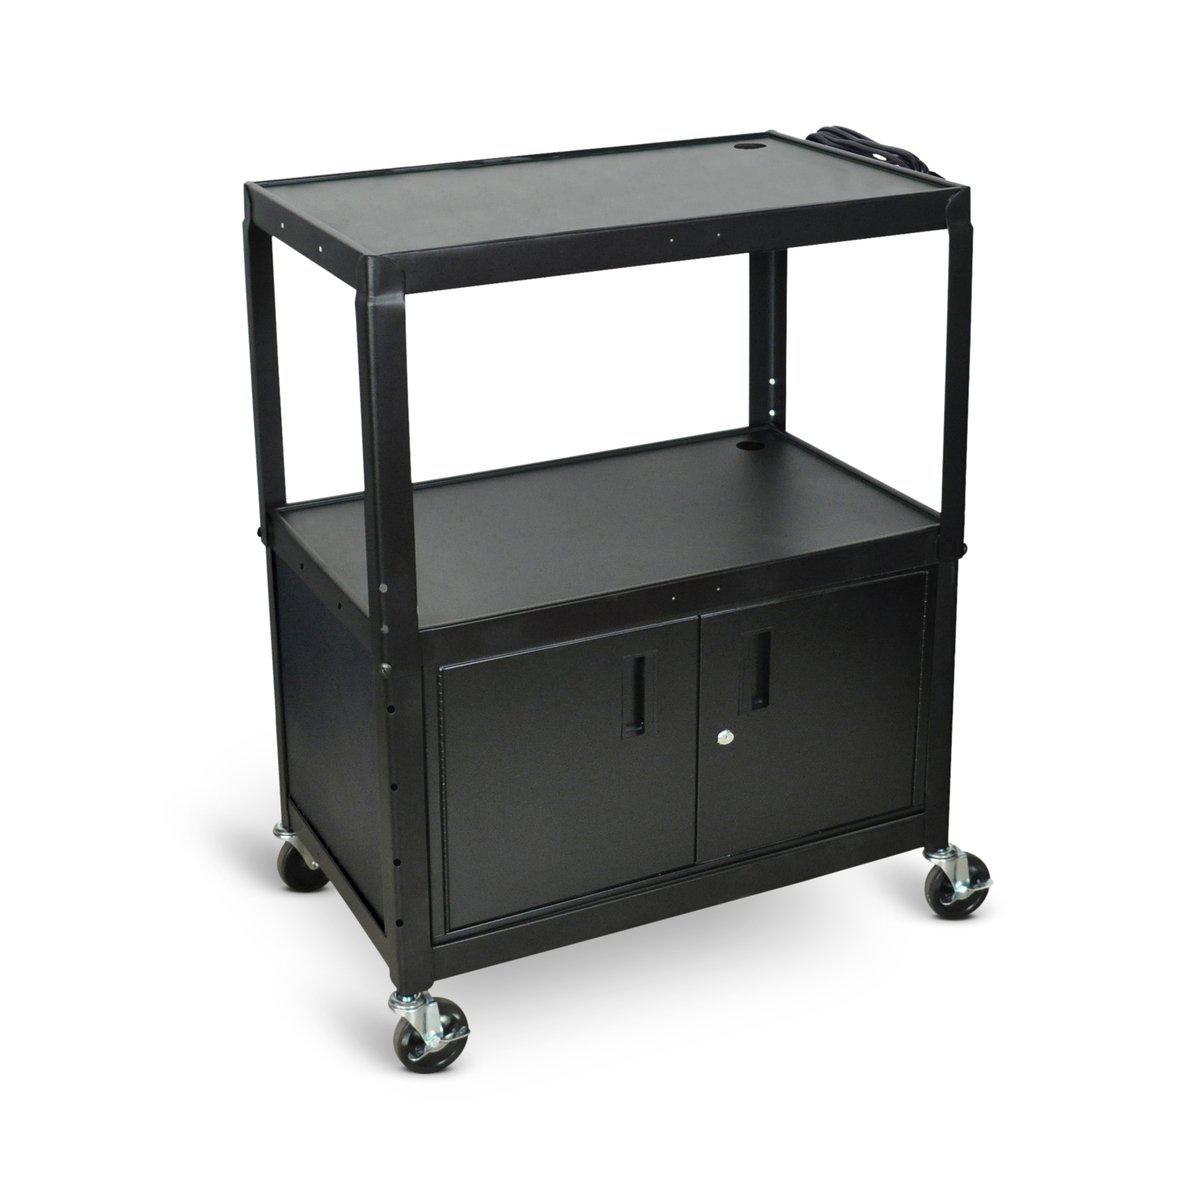 Extra-Large Adjustable-Height Steel AV Cart with Cabinet